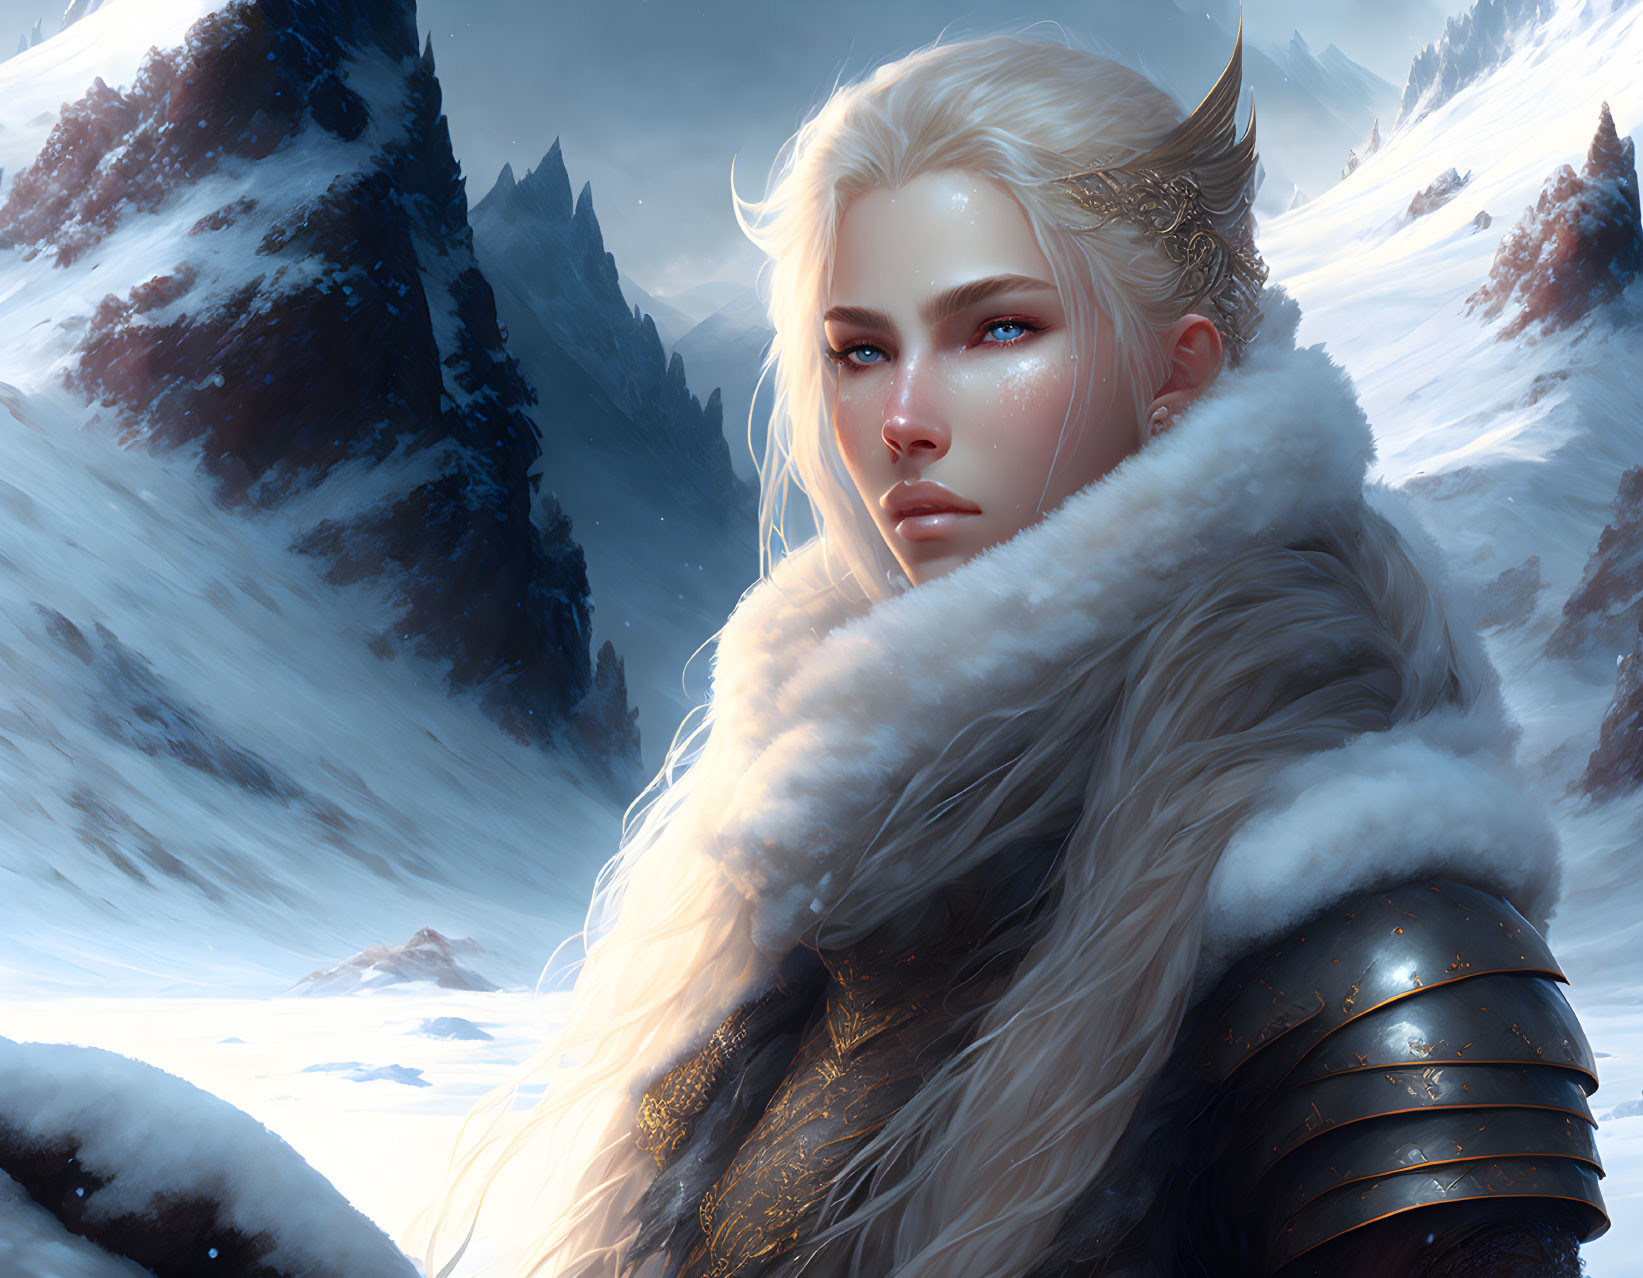 Fierce woman with blue eyes and blonde hair in fur and armor on snowy mountain.